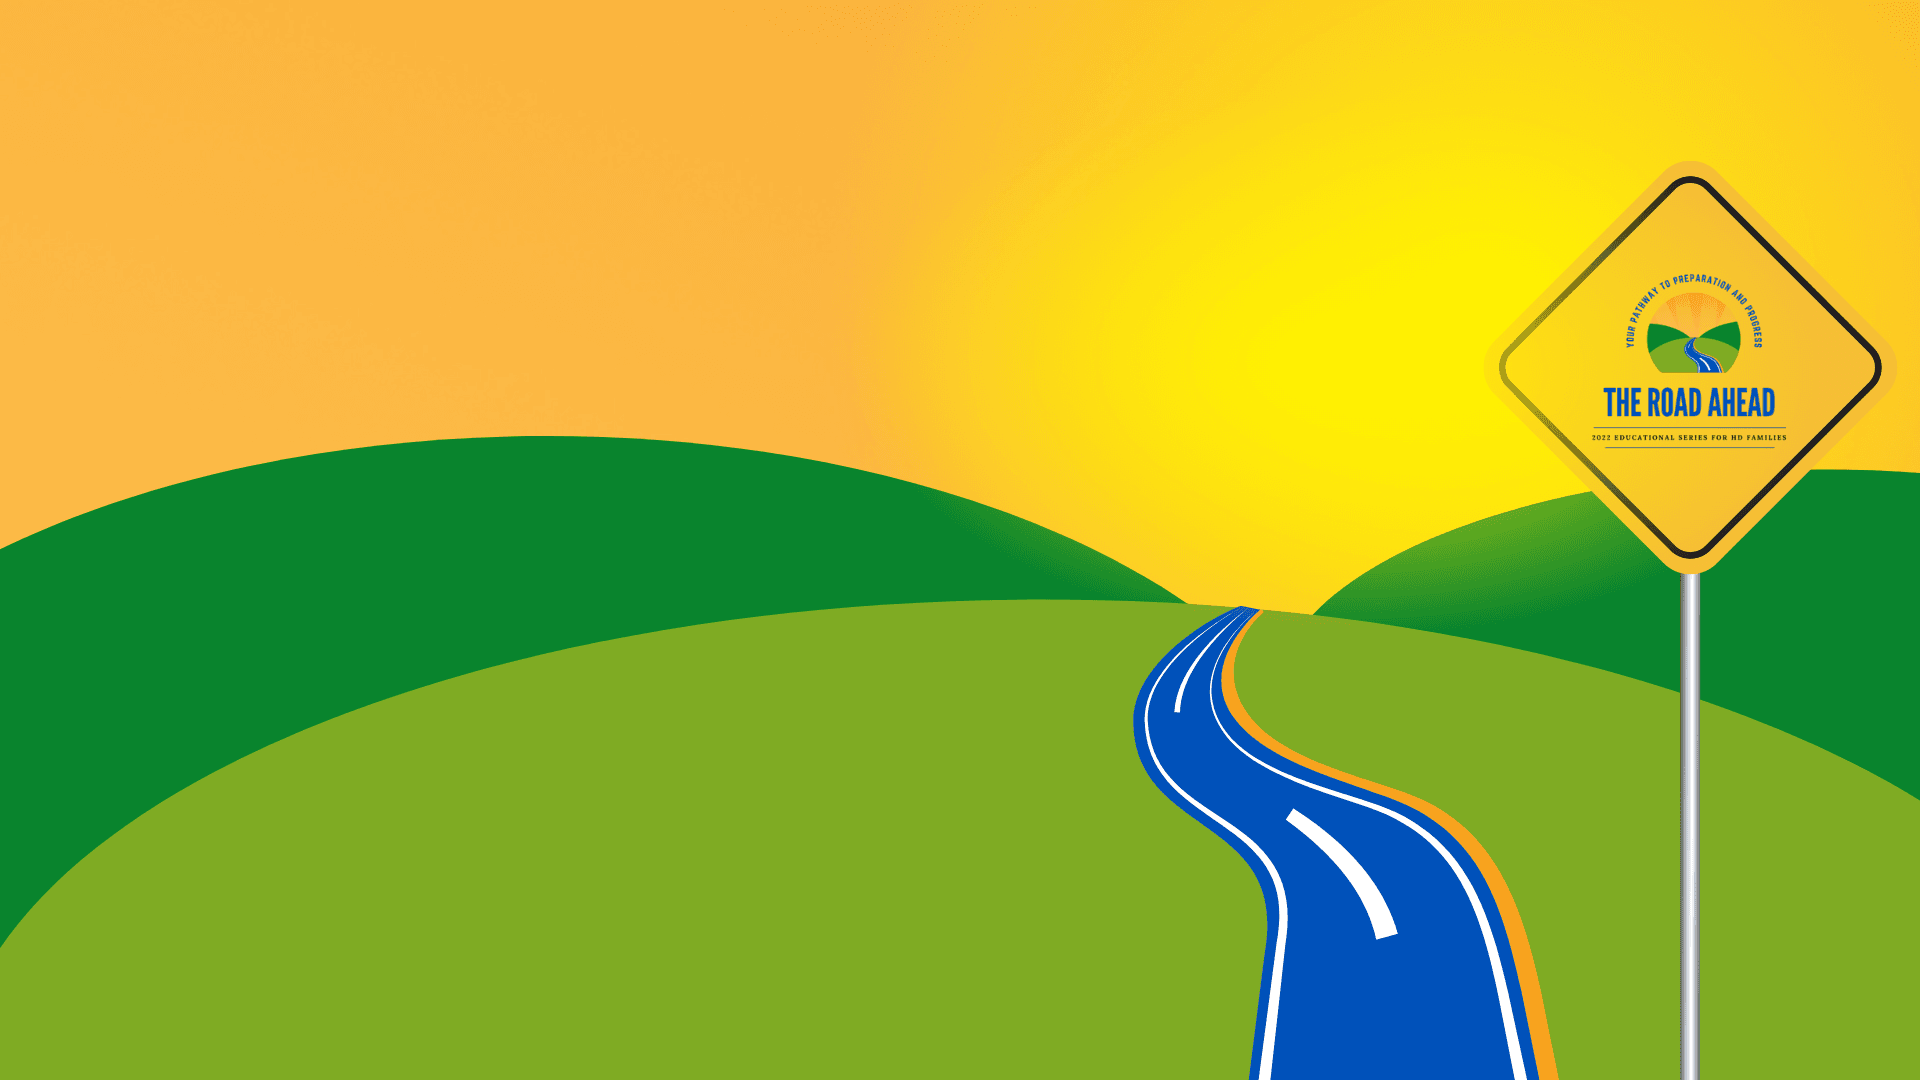 The Road Ahead: Your Pathway to Preparation and Progress